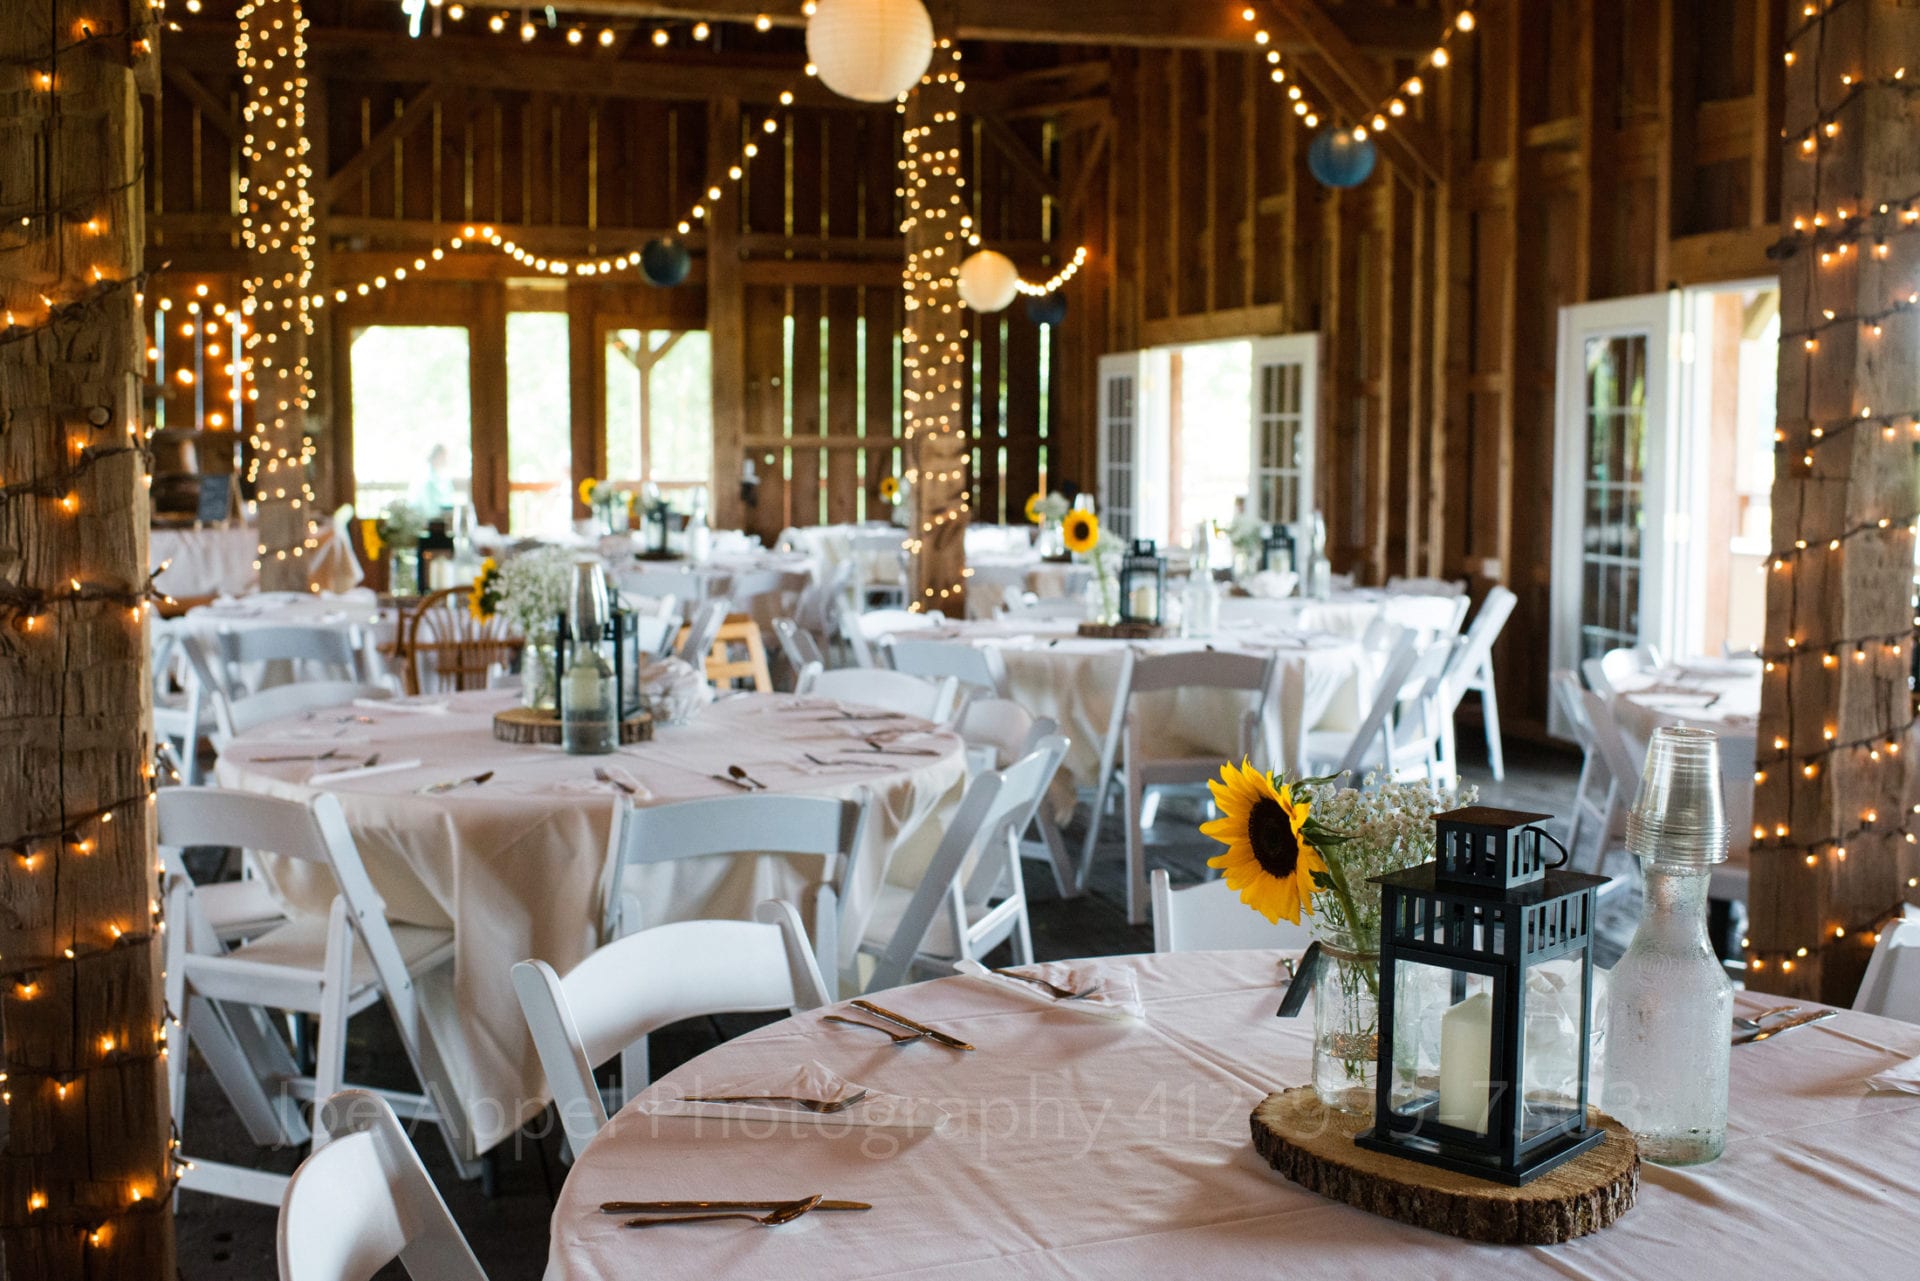 sunflowers and twinkle lights accent the white tablecloth covered interior of a barn set up for an Armstrong Farms Weddings